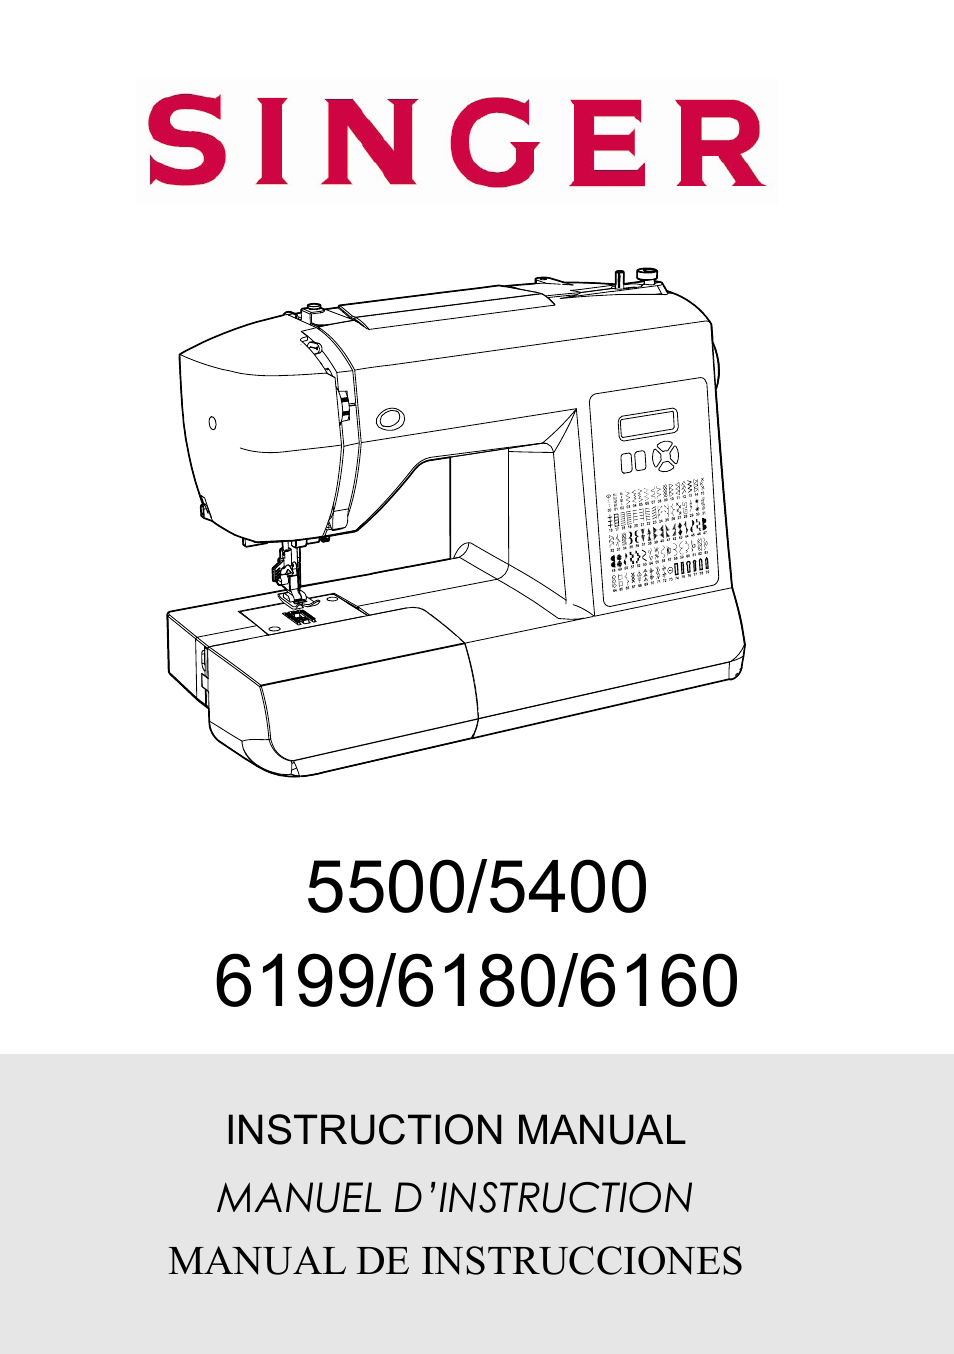 SINGER 6199 User Manual | 64 pages | Also for: 6180, 6160, 5400, 5500